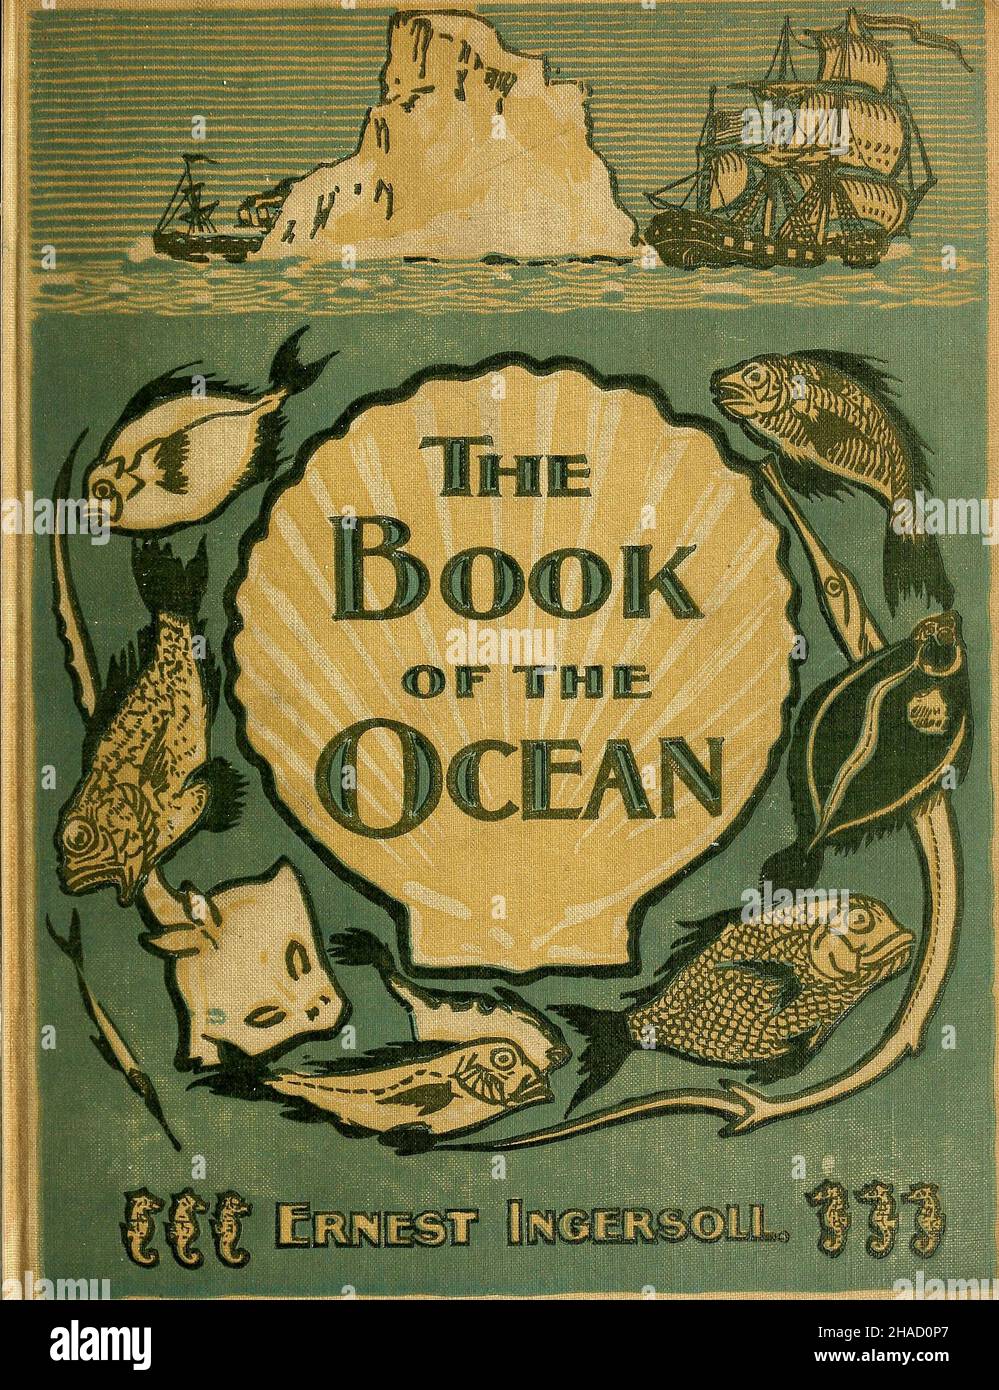 from ' The book of the ocean ' by Ernest Ingersoll, Publication date 1898 Publisher: New York, The Century co. Topics include The ocean and its origin.-- Waves, tides, and currents.--The building and rigging of ships.--Early voyages and exploration.--Secrets won from the frozen North.--War-ships and naval battles.--The merchants of the sea.--Robbers of the seas.--Yachting and pleasure-boating.--Dangers of the deep.-- Fishing and other marine industries.--The plants of the sea and their uses.--Animal life in the sea Stock Photo